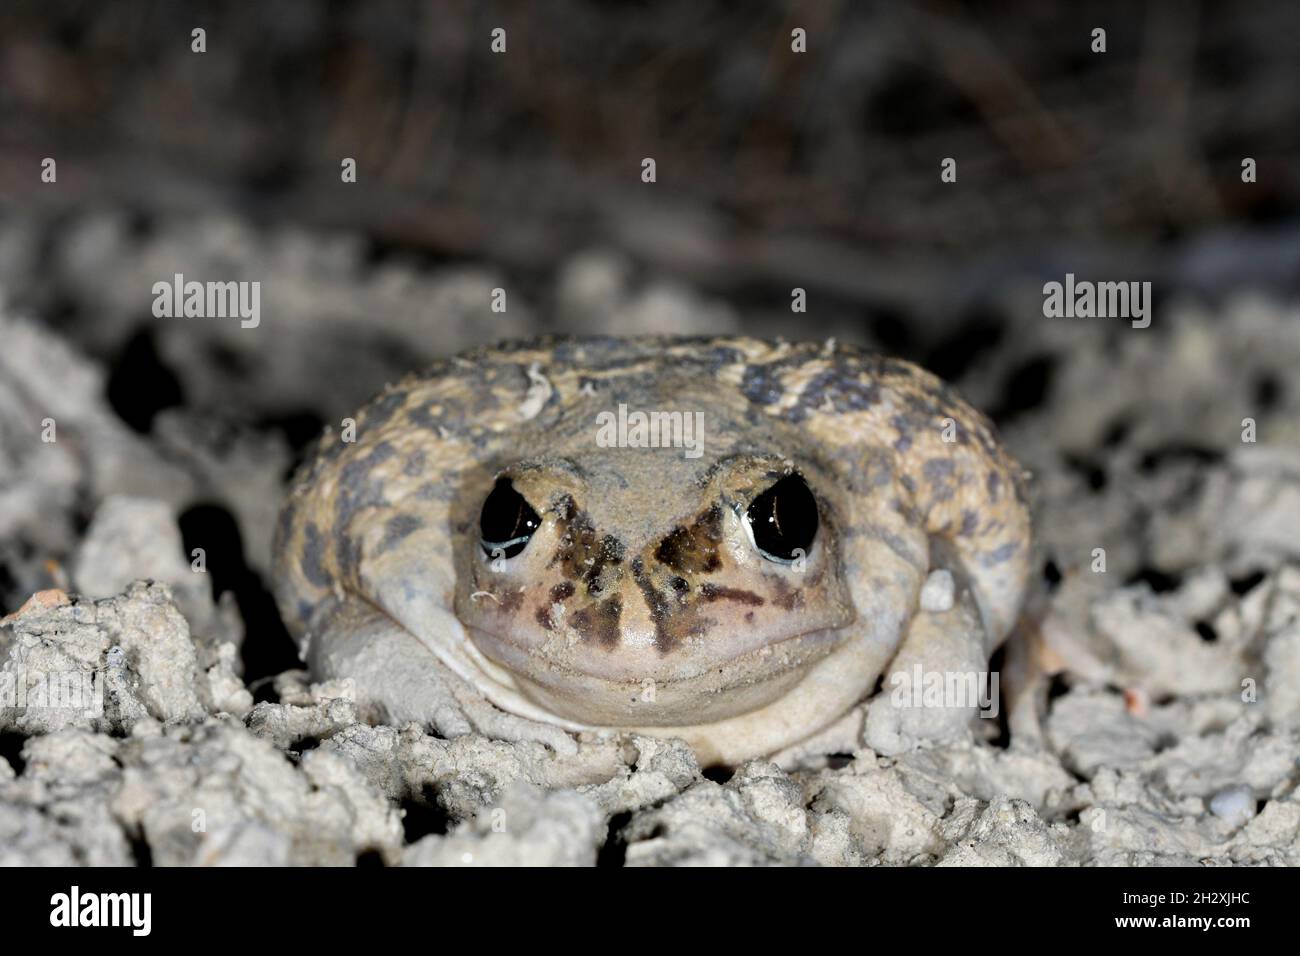 Common toad or European toad, a species of frog in the Bufonidae family. Stock Photo